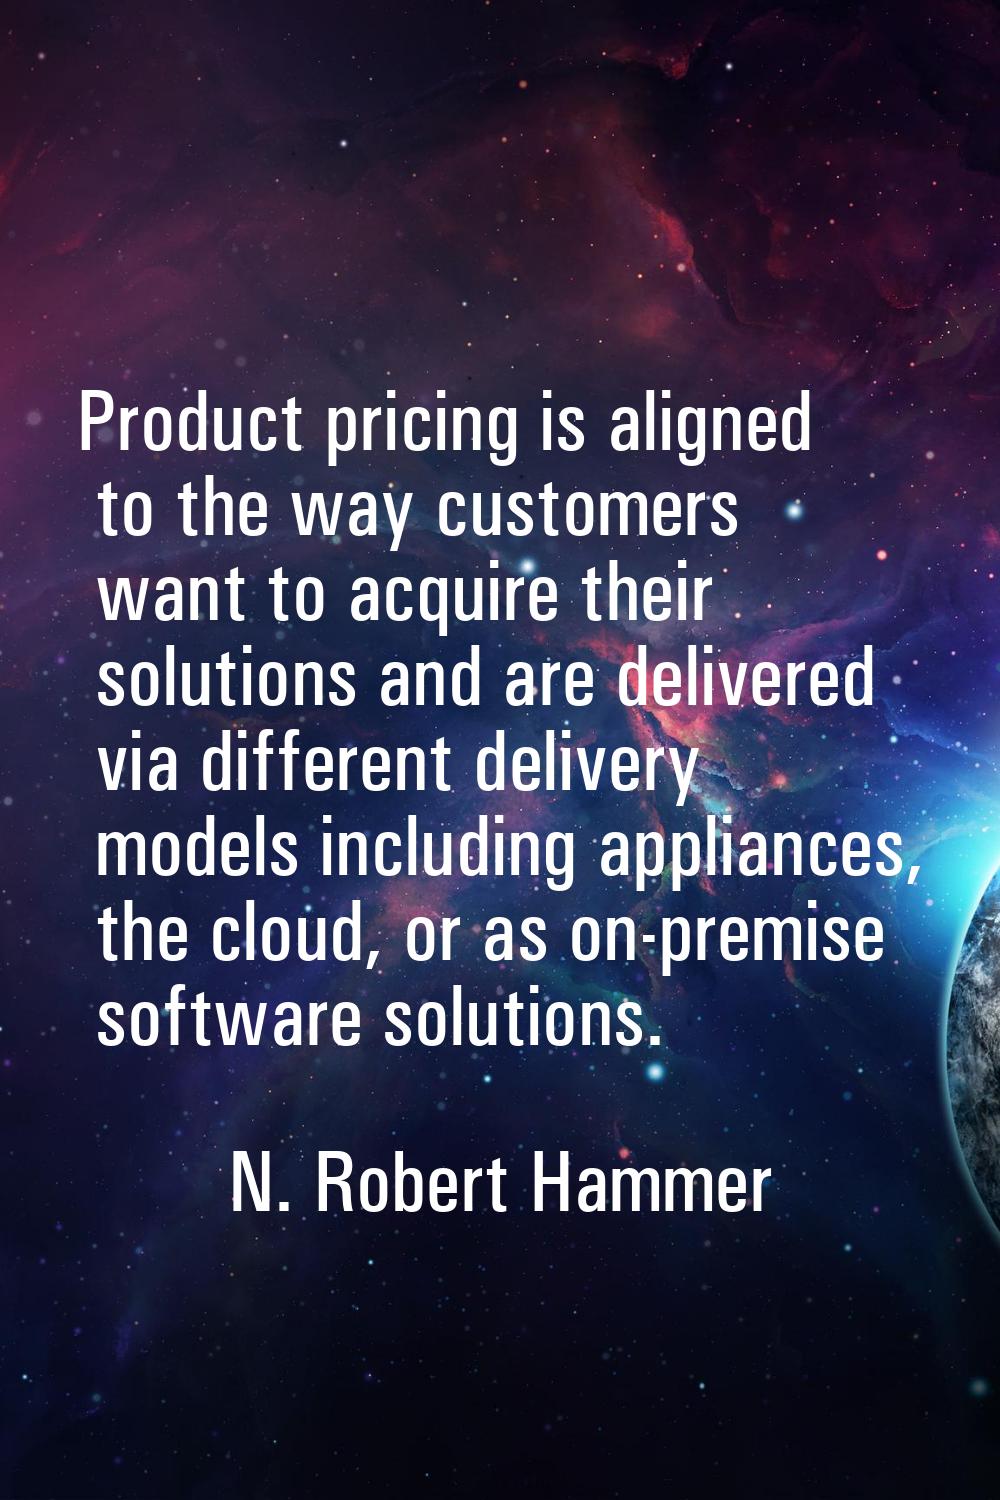 Product pricing is aligned to the way customers want to acquire their solutions and are delivered v